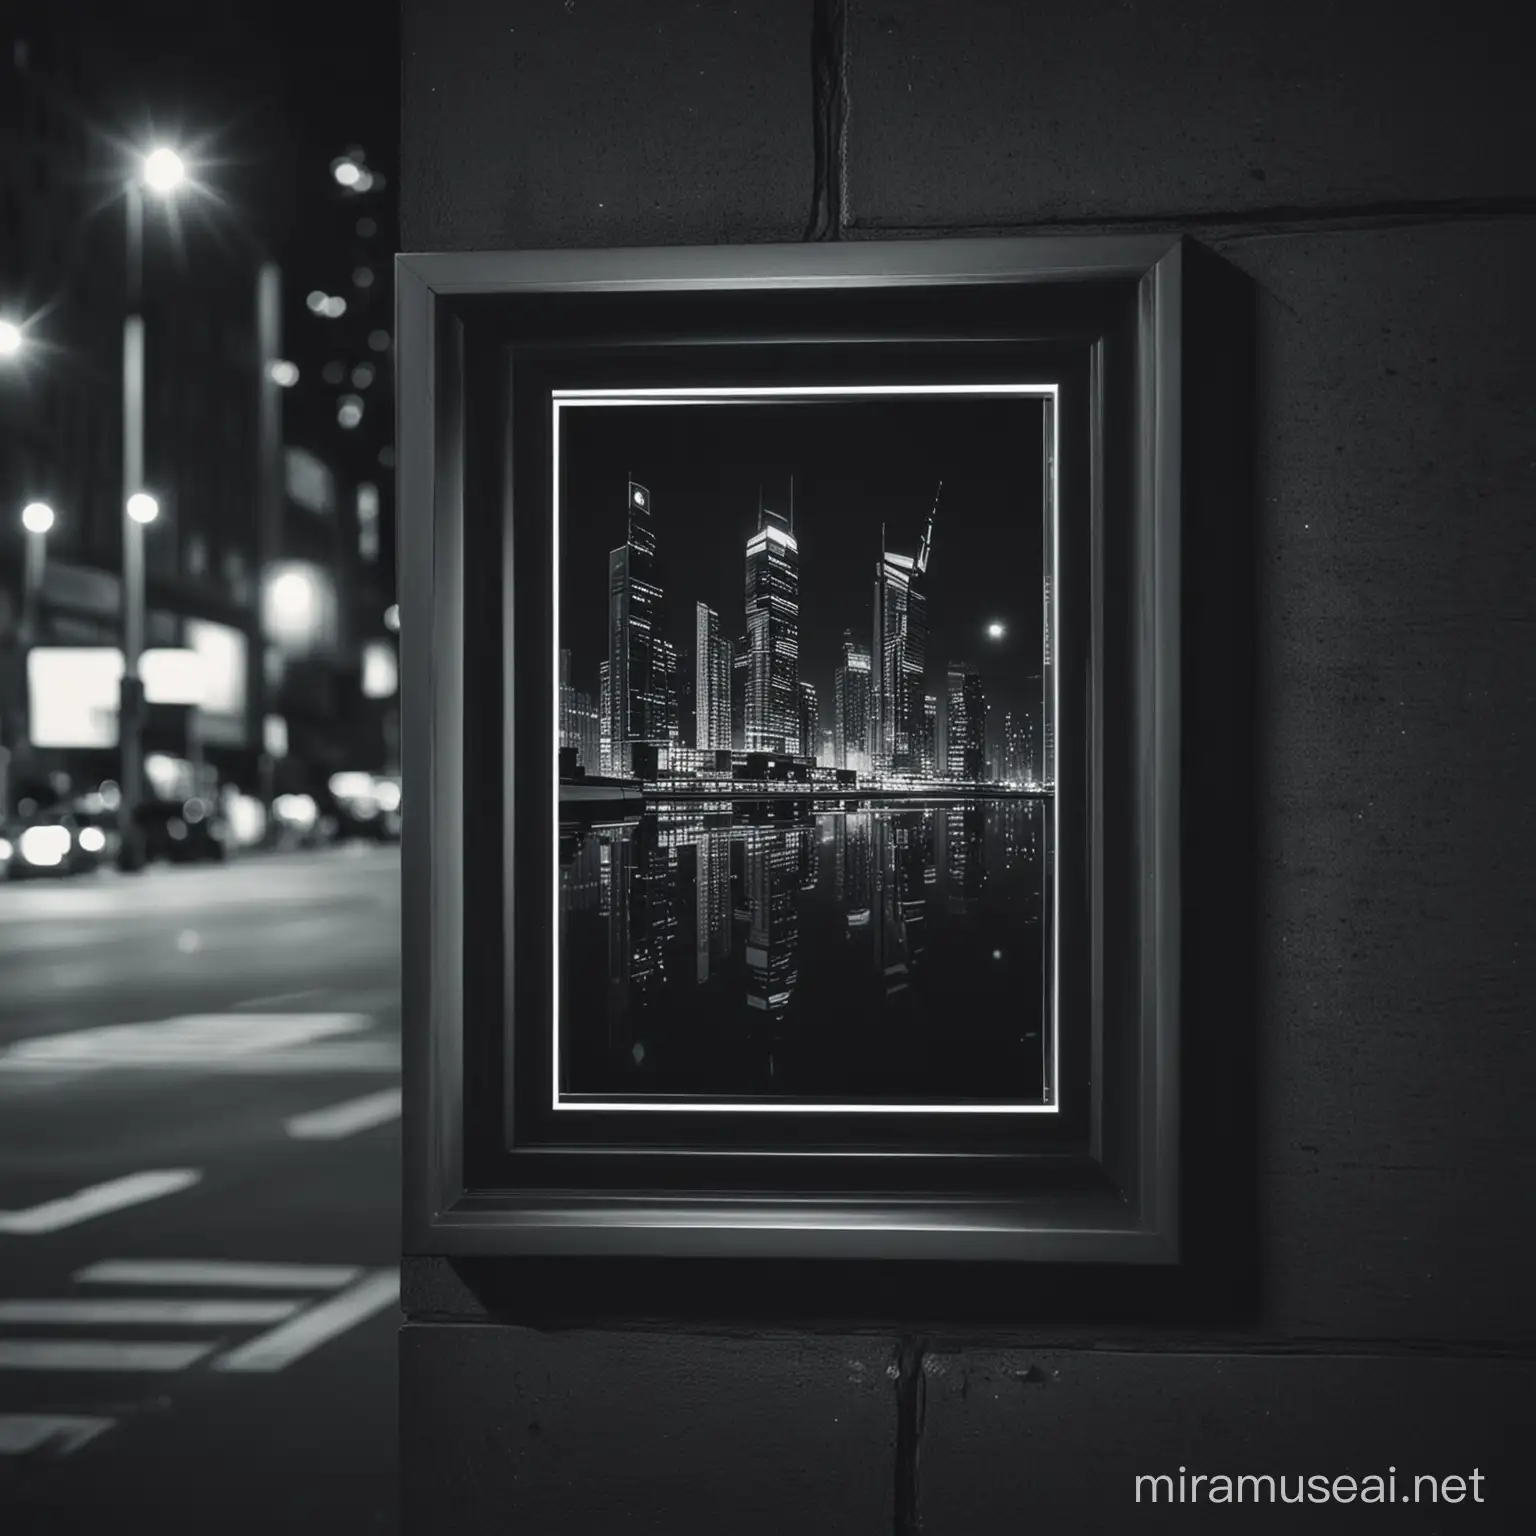 Small A4 black frame mockup outside during the night  in a cyber city